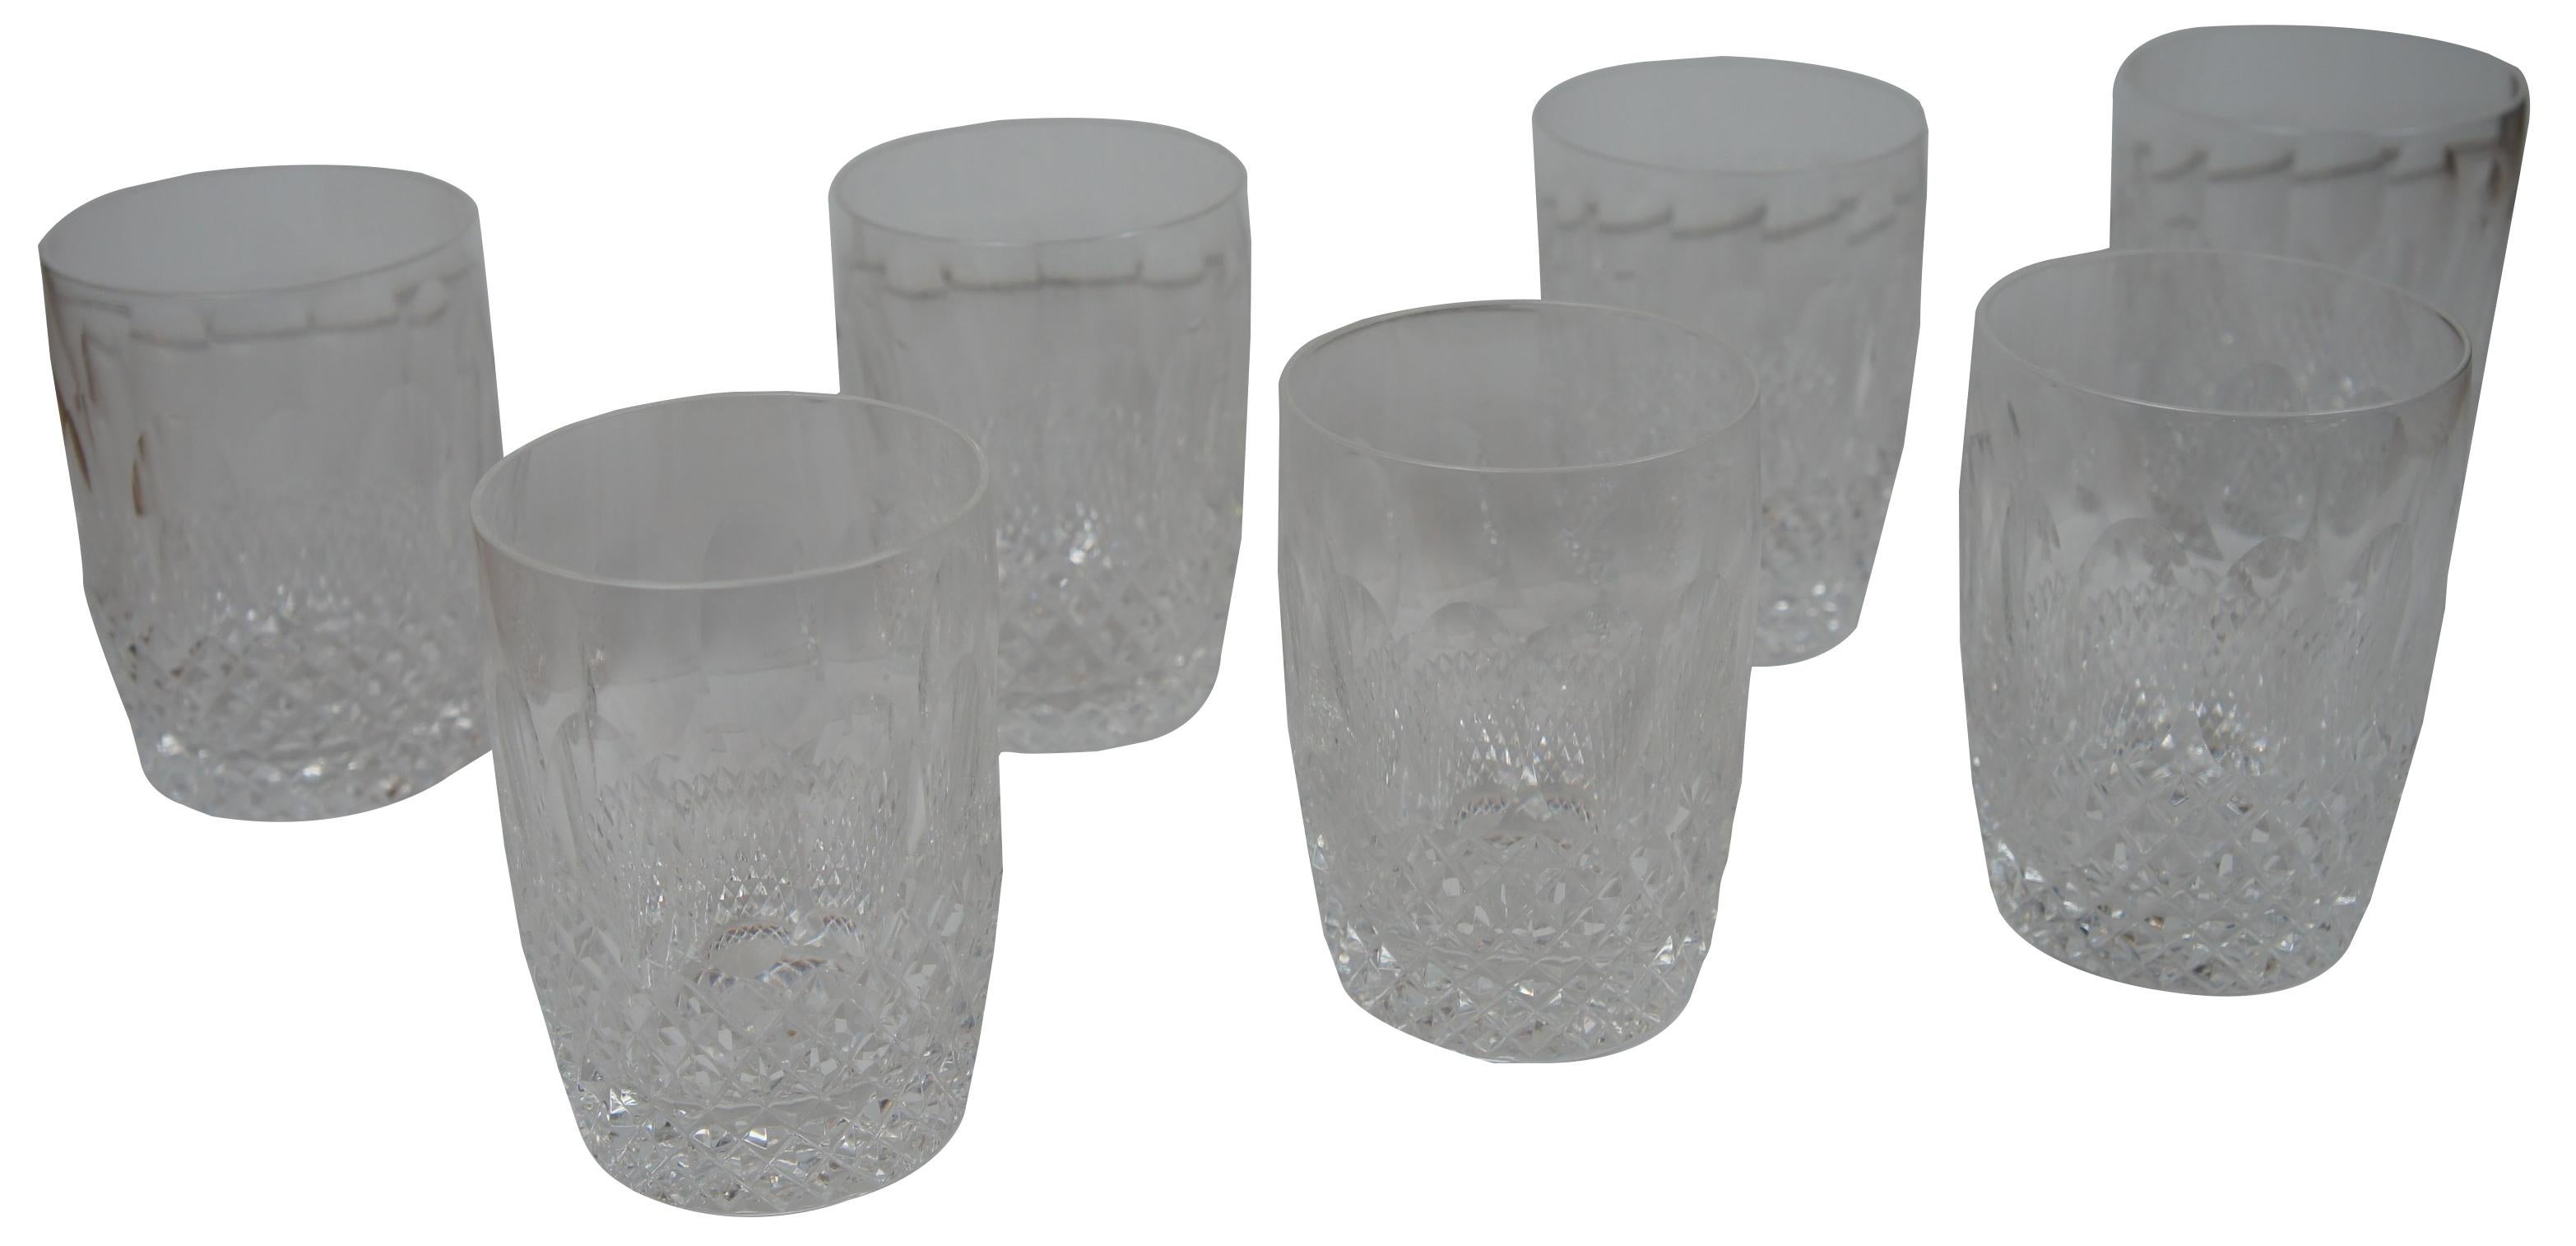 Set of 7 waterford cut crystal old fashioned or whiskey tumblers in the Colleen pattern.
 